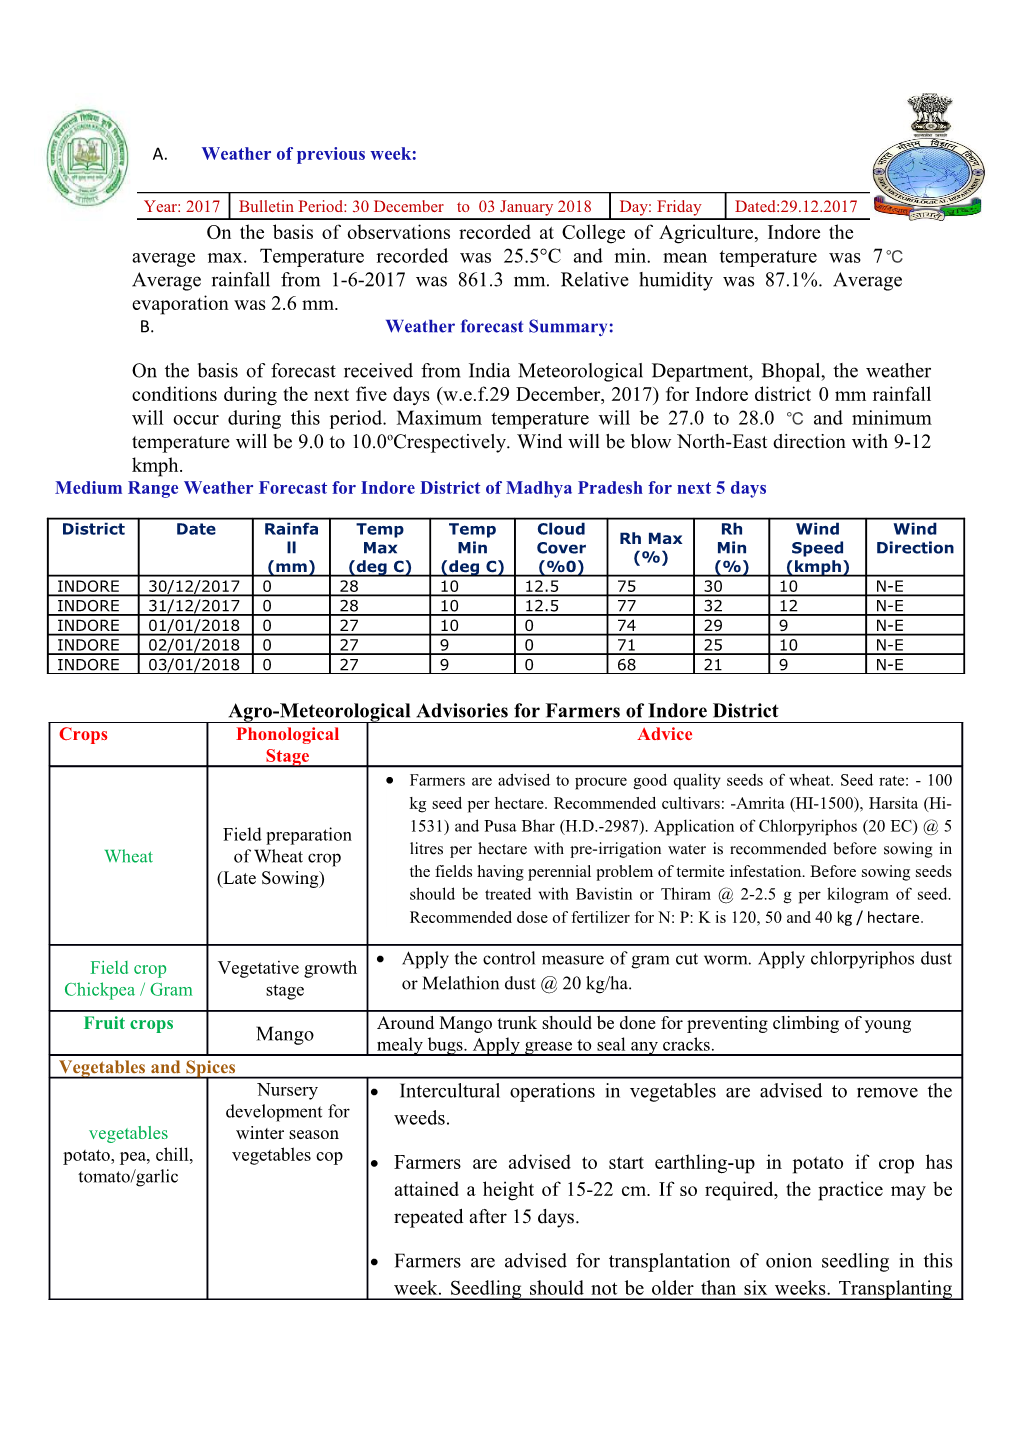 Agro-Meteorological Advisories for Farmers of Indore District